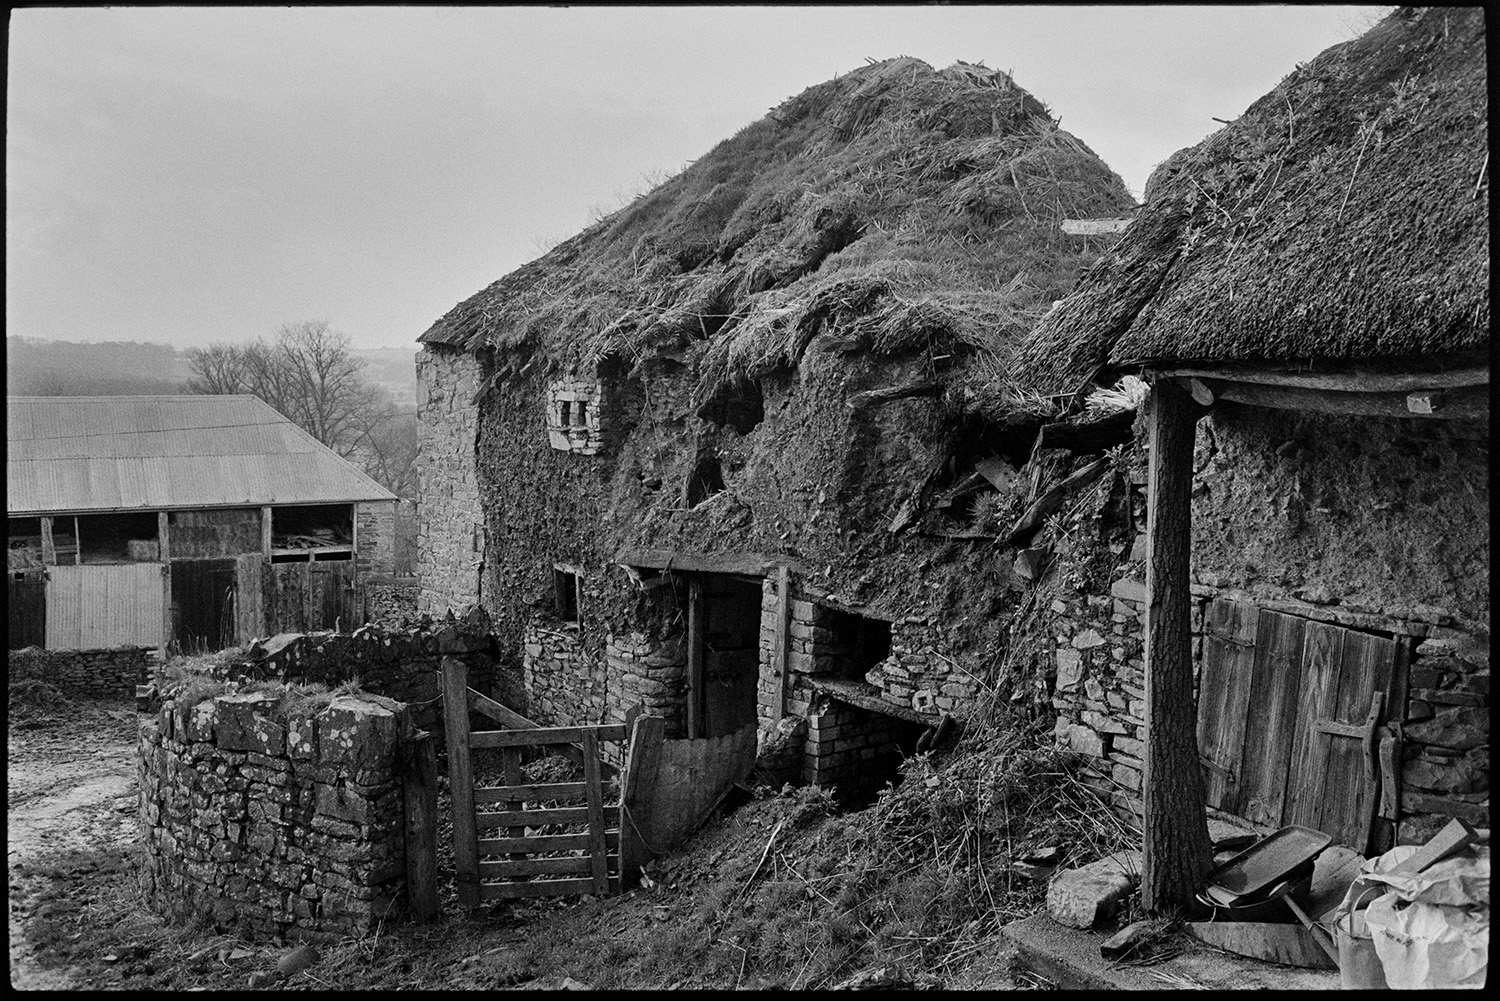 Ruined cob and thatch barn.
[Ruined cob and stone barn with a collapsing thatch roof in the farmyard at Bridgetown, Iddesleigh. Another barn with a corrugated iron roof and hay bales can be seen in the background.]